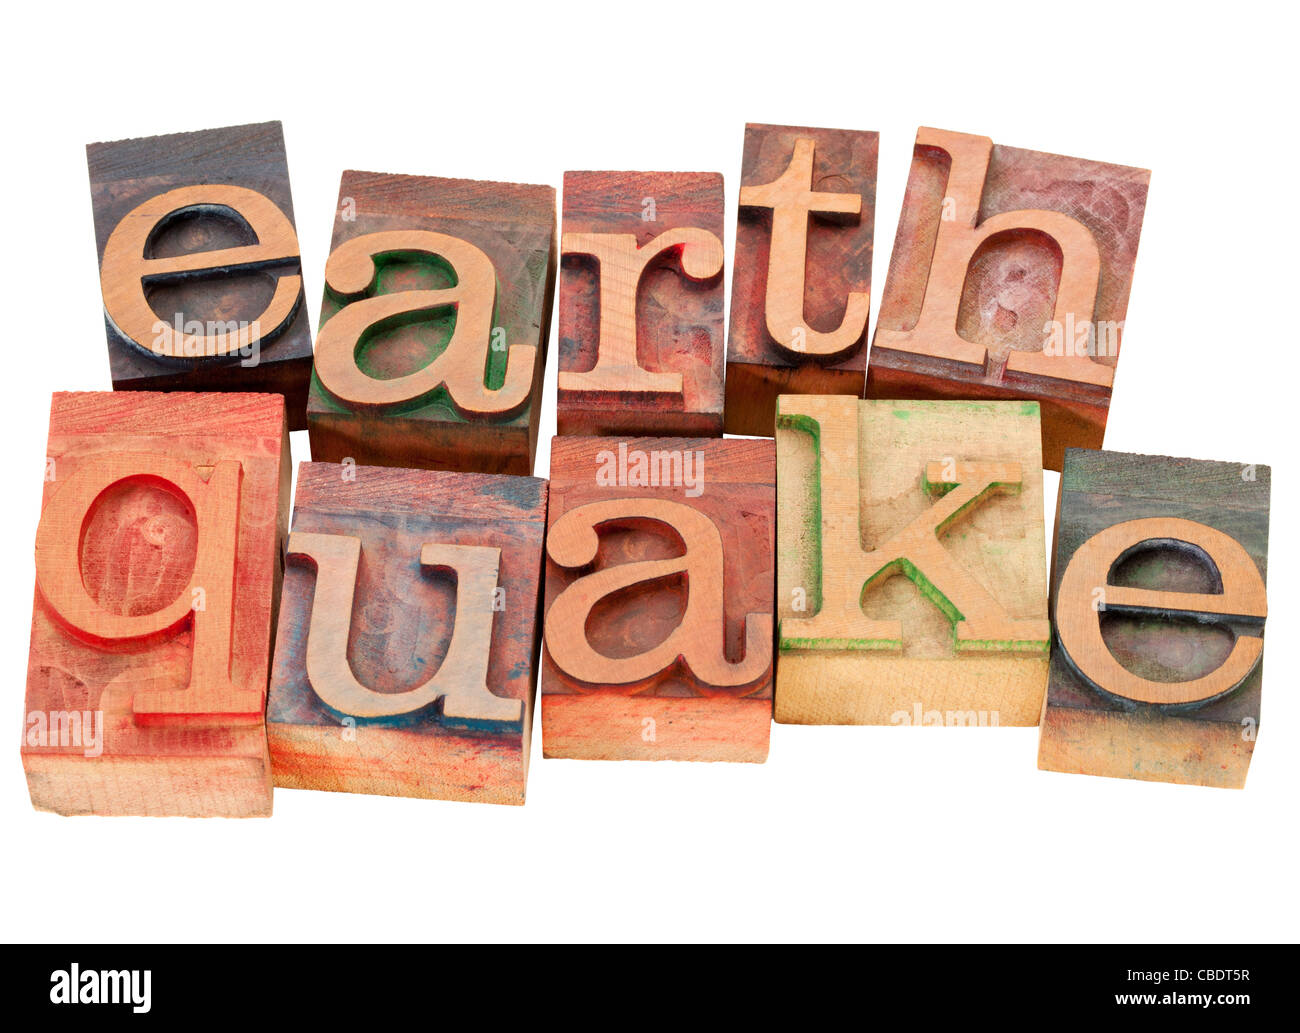 earthquake - isolated word in vintage wood letterpress printing blocks Stock Photo